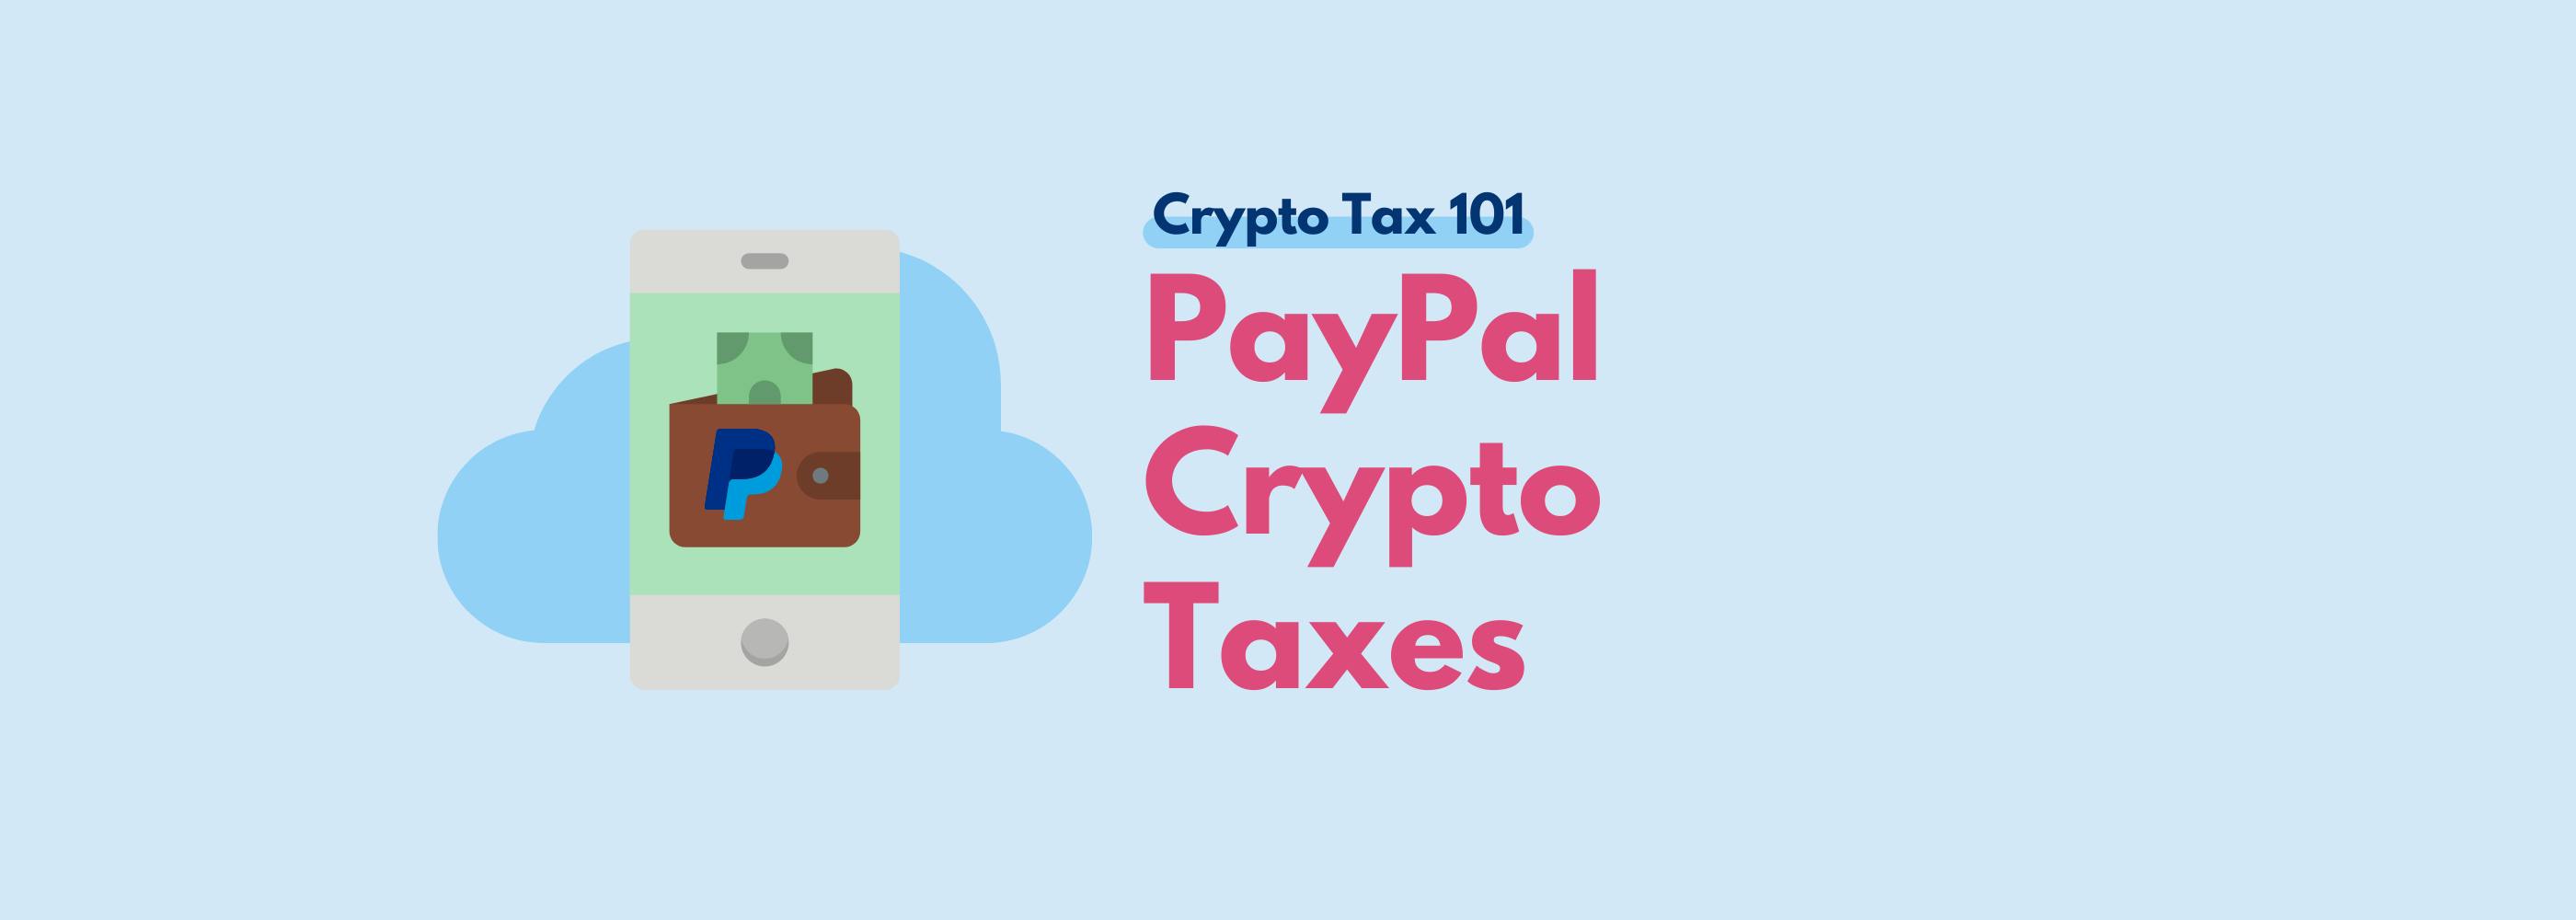 PayPal Crypto Taxes Guide